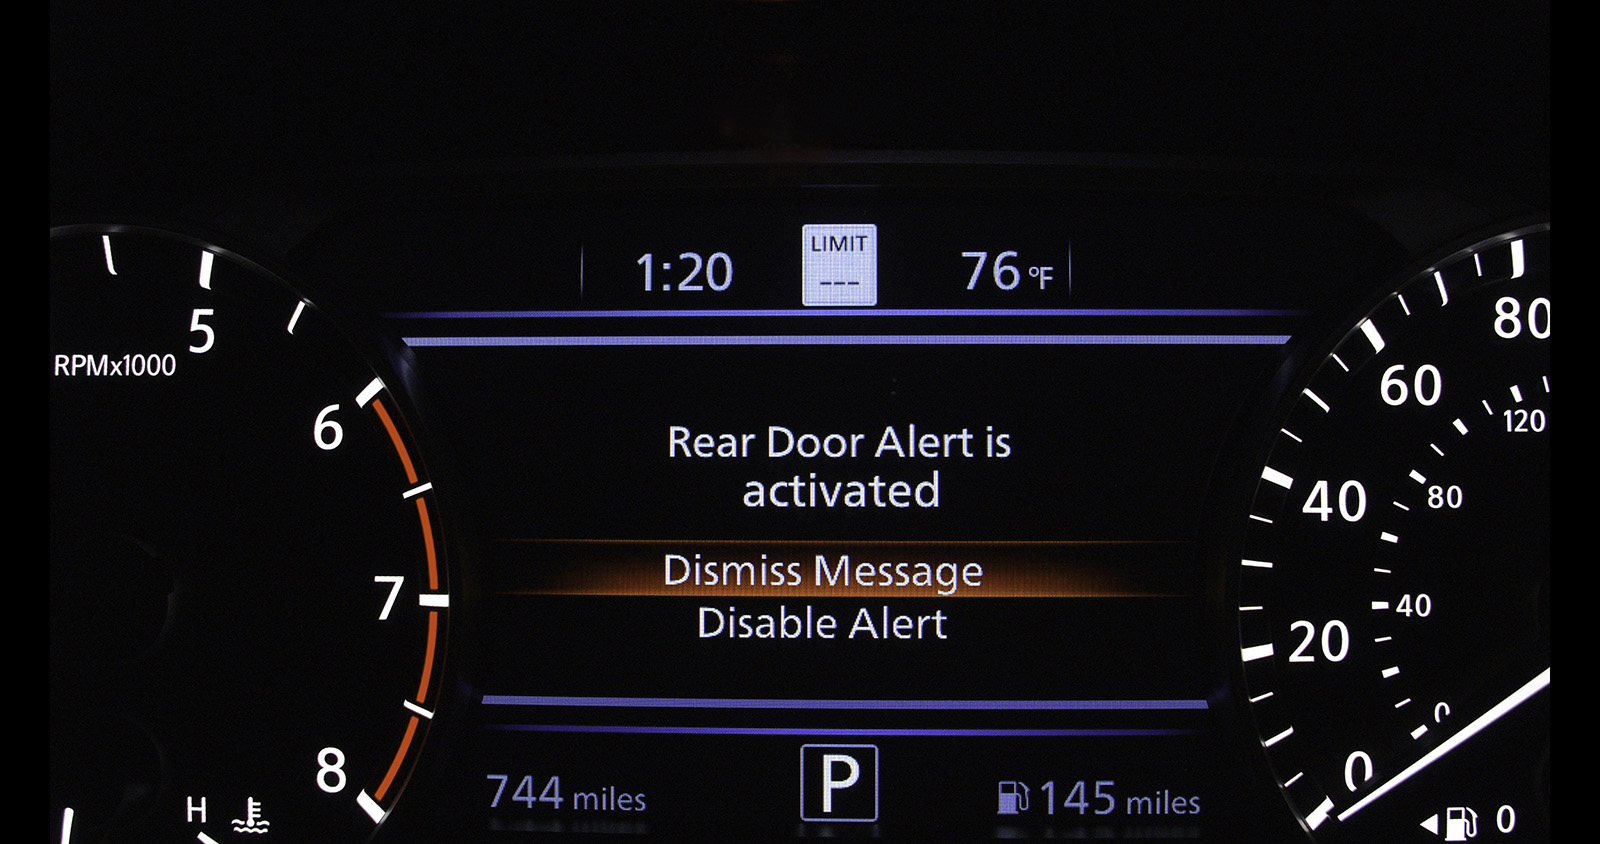 nissan wants no child or pet left behind in a hot car with rear door alert